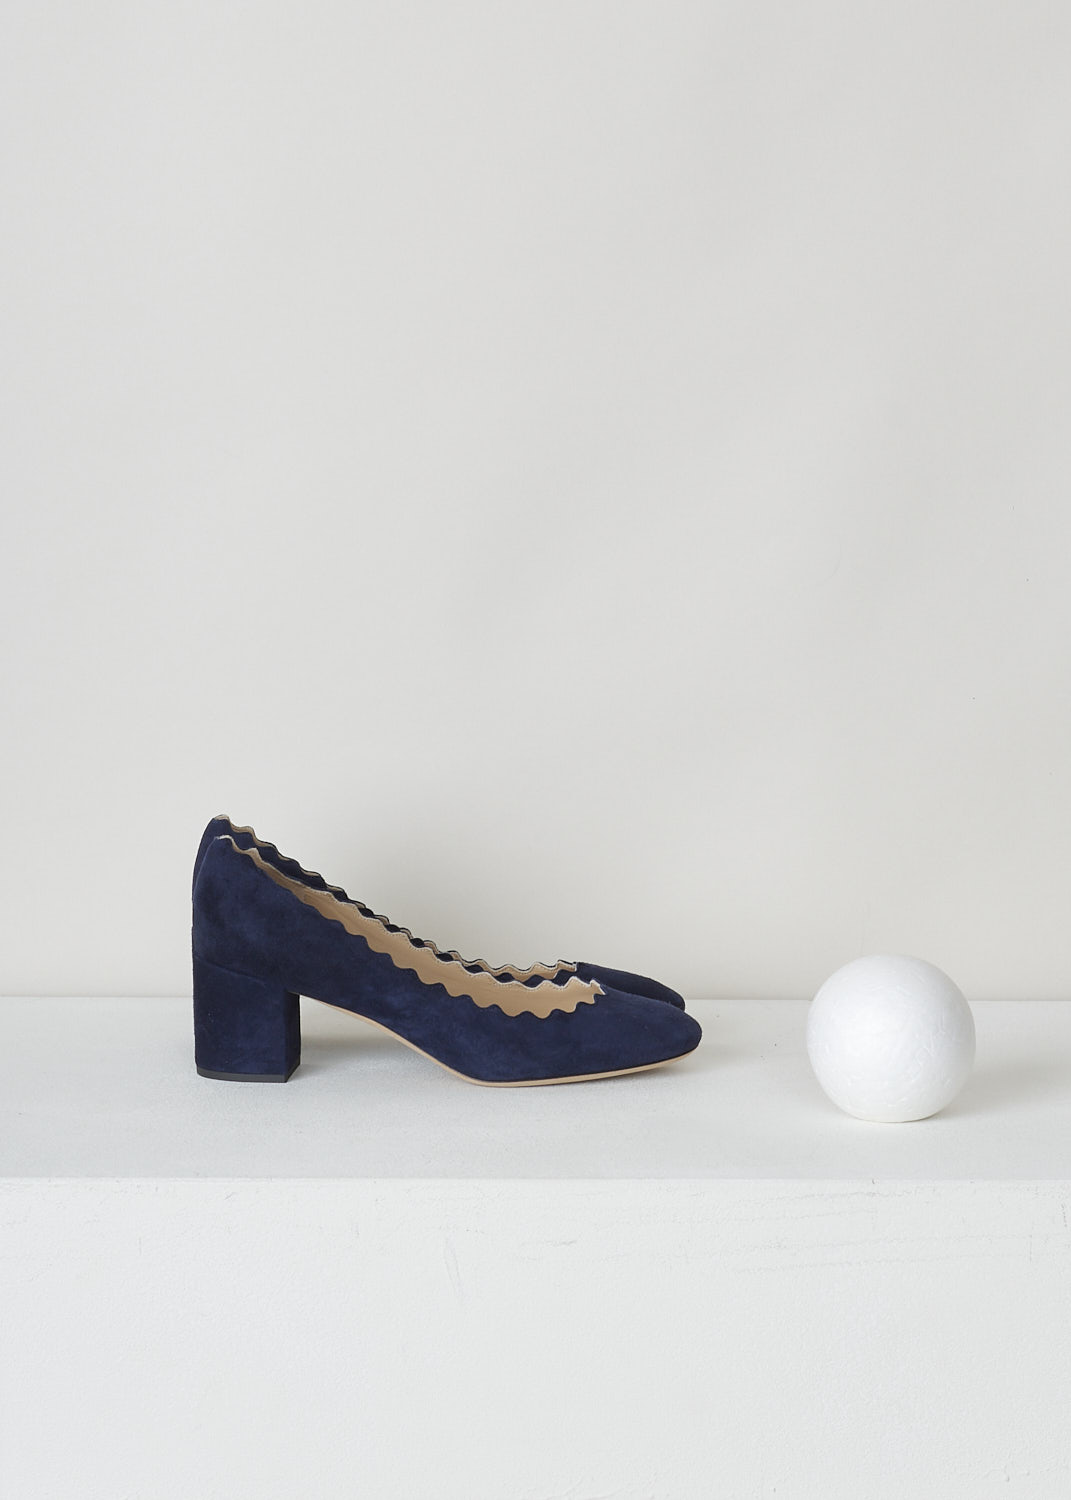 CHLOÃ‰, NAVY BLUE PUMPS WITH SCALLOPED TOPLINE, CH26230_702_BLUE_LAGOON, Blue, Side, Navy blue suede pumps featuring a chunky heel, round toe vamp and a scalloped top-line. 
